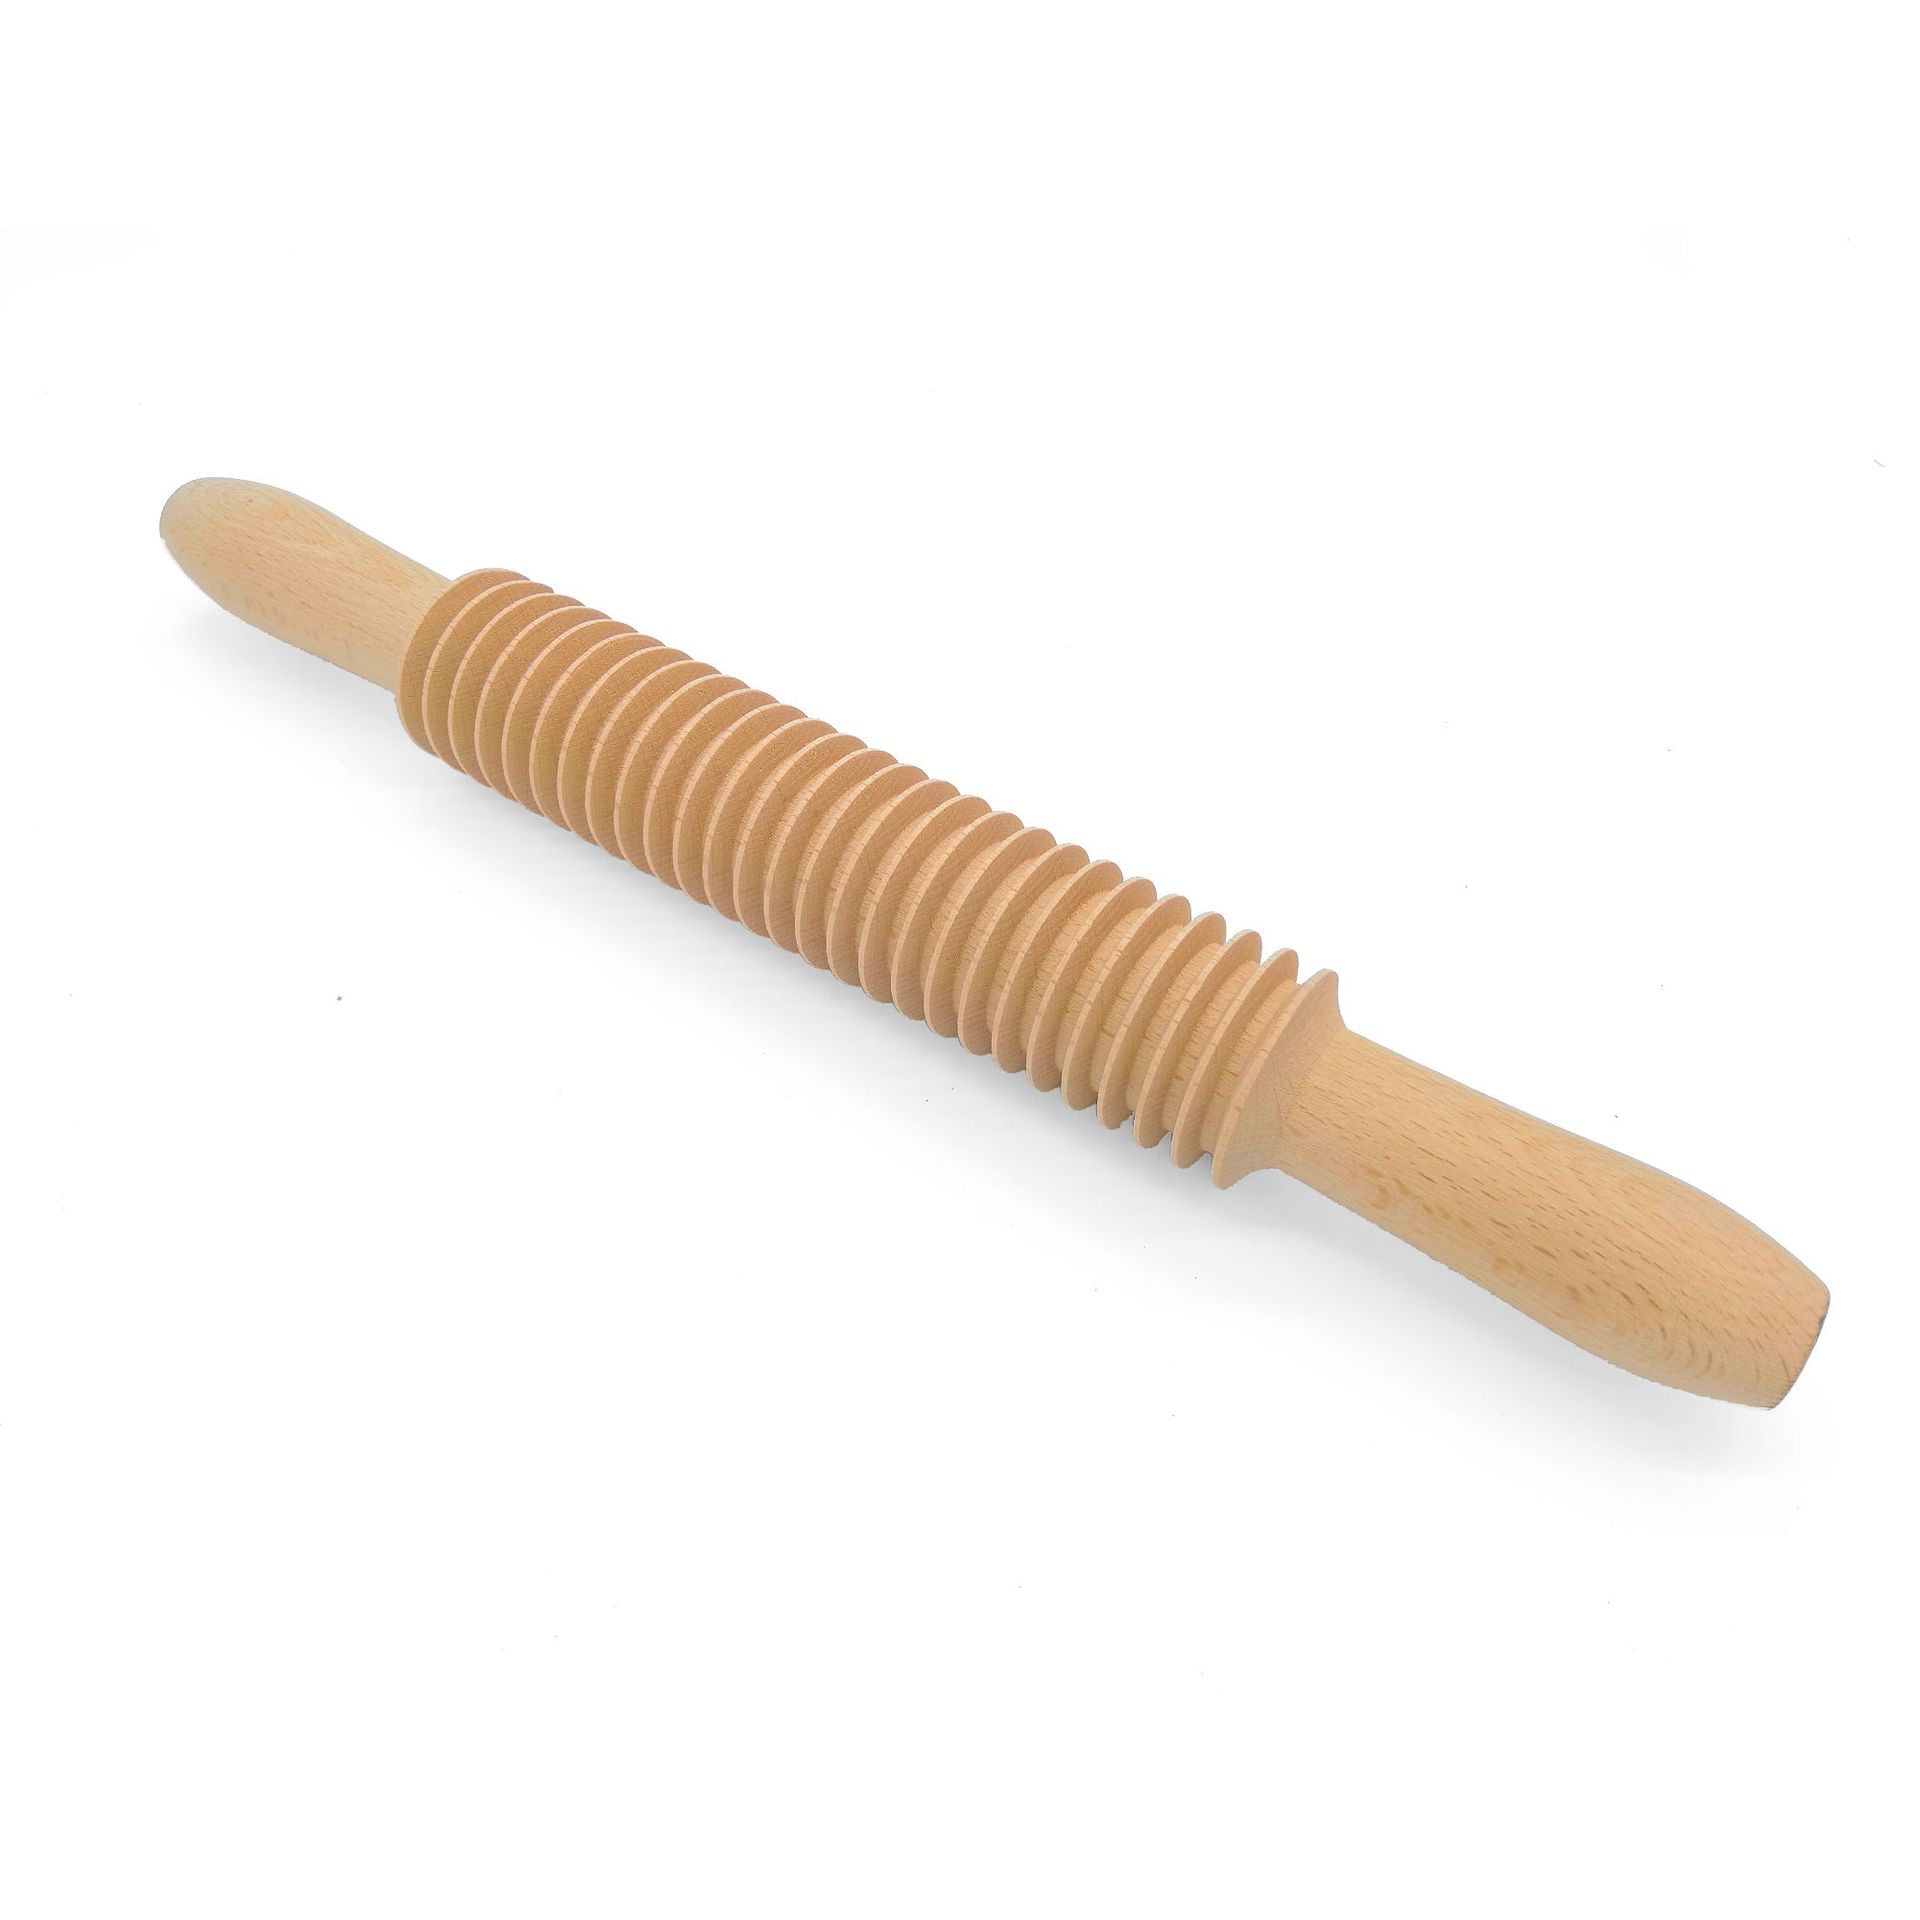 Wooden screw thread long thin spaghetti beech wood rolling pin for baking dough pasta noodles